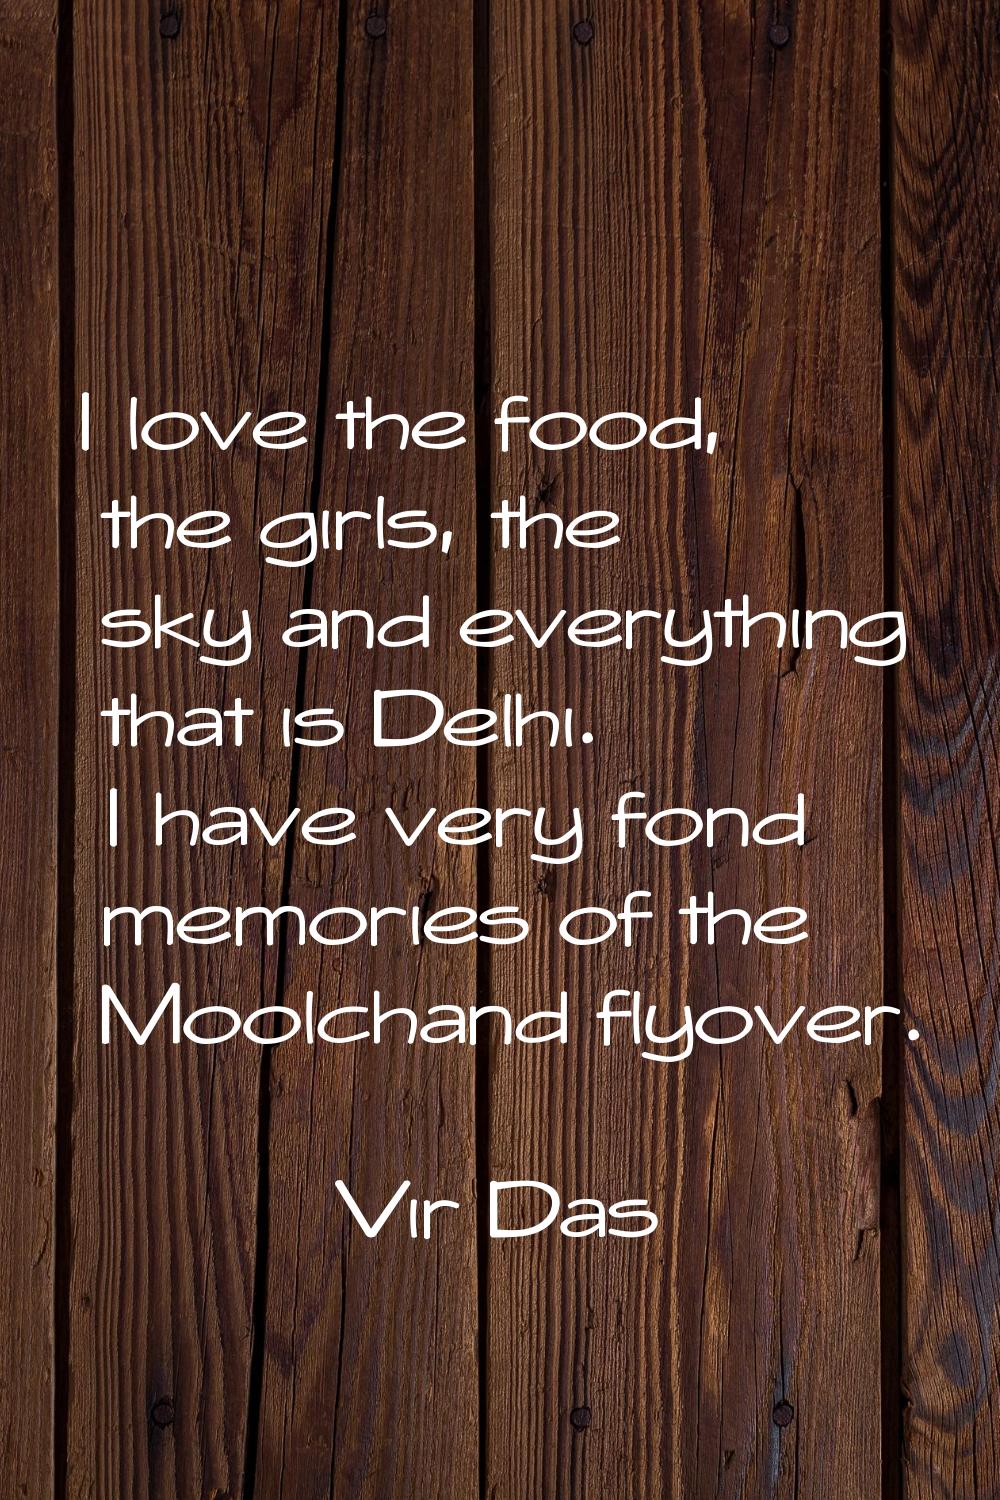 I love the food, the girls, the sky and everything that is Delhi. I have very fond memories of the 